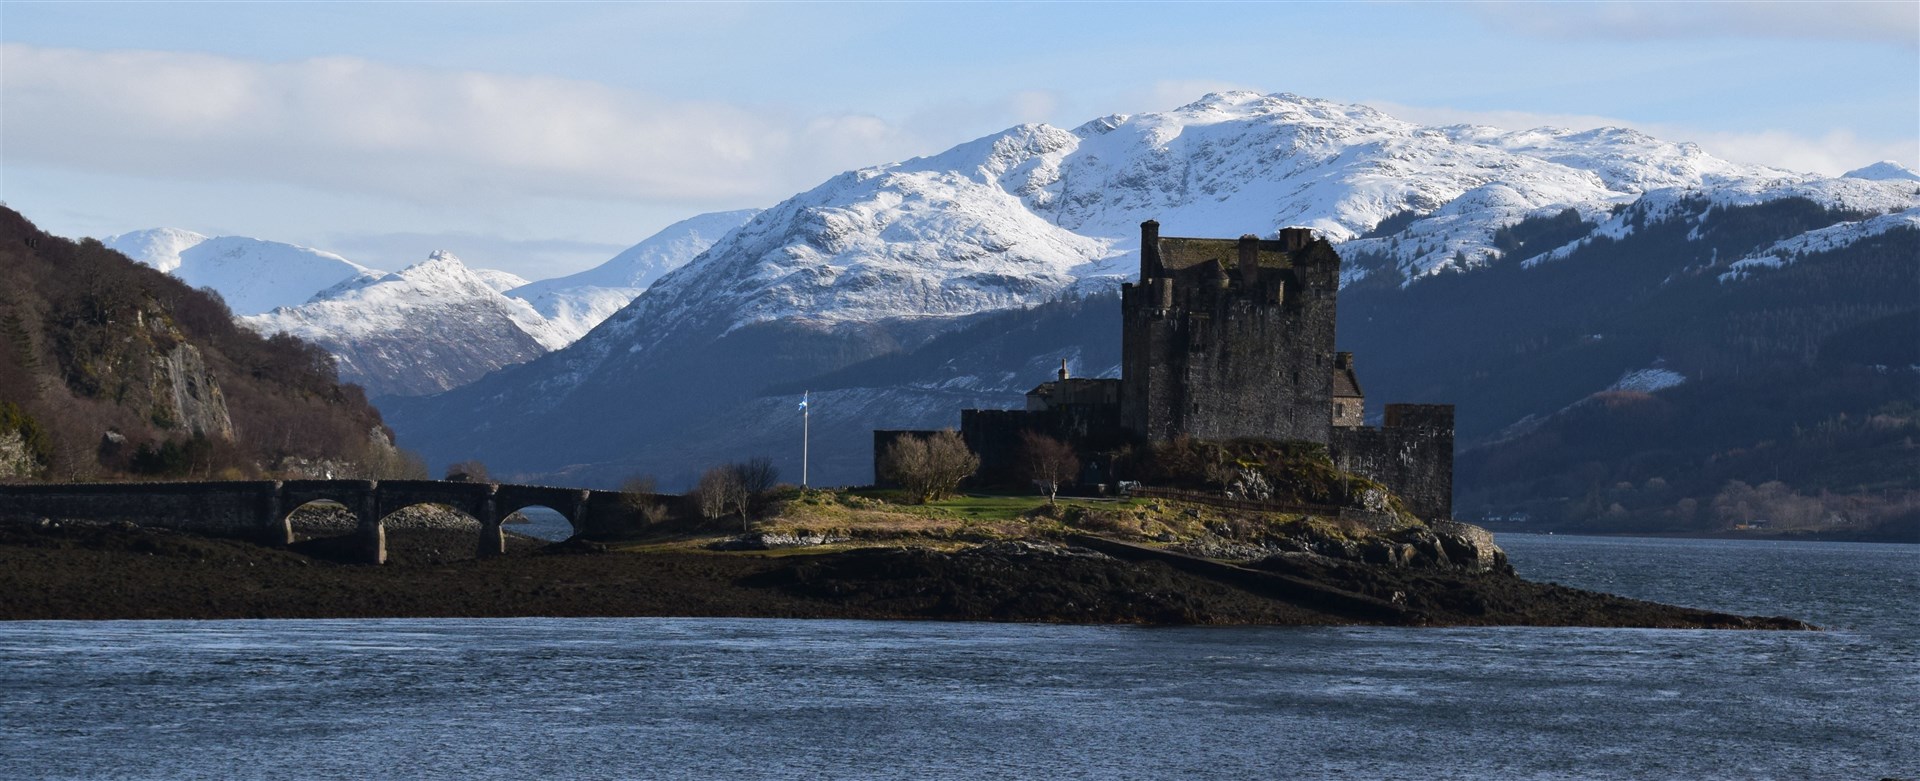 Eilean Donan Castle back in March, before the lockdown came into force.